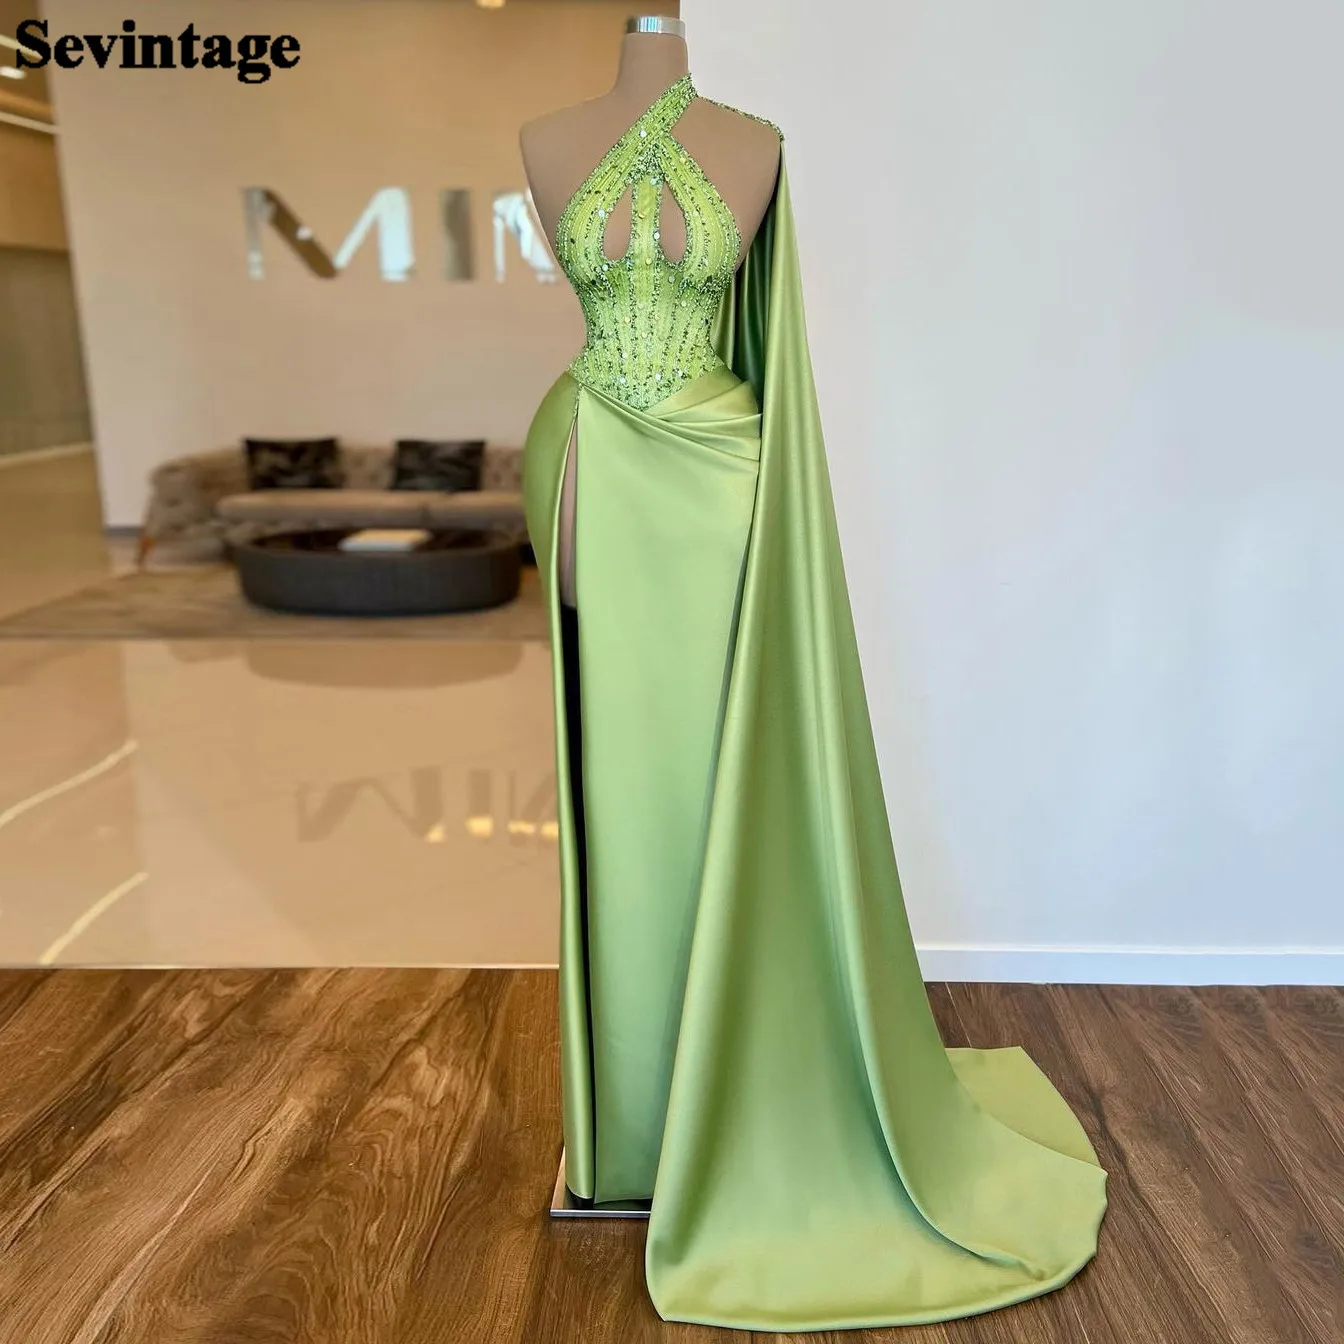 

Sevintage Mint Green Mermaid Satin Women Evening Dresses Sequines Beaded High Side Slit Formal Party Prom Gowns Event Outfits